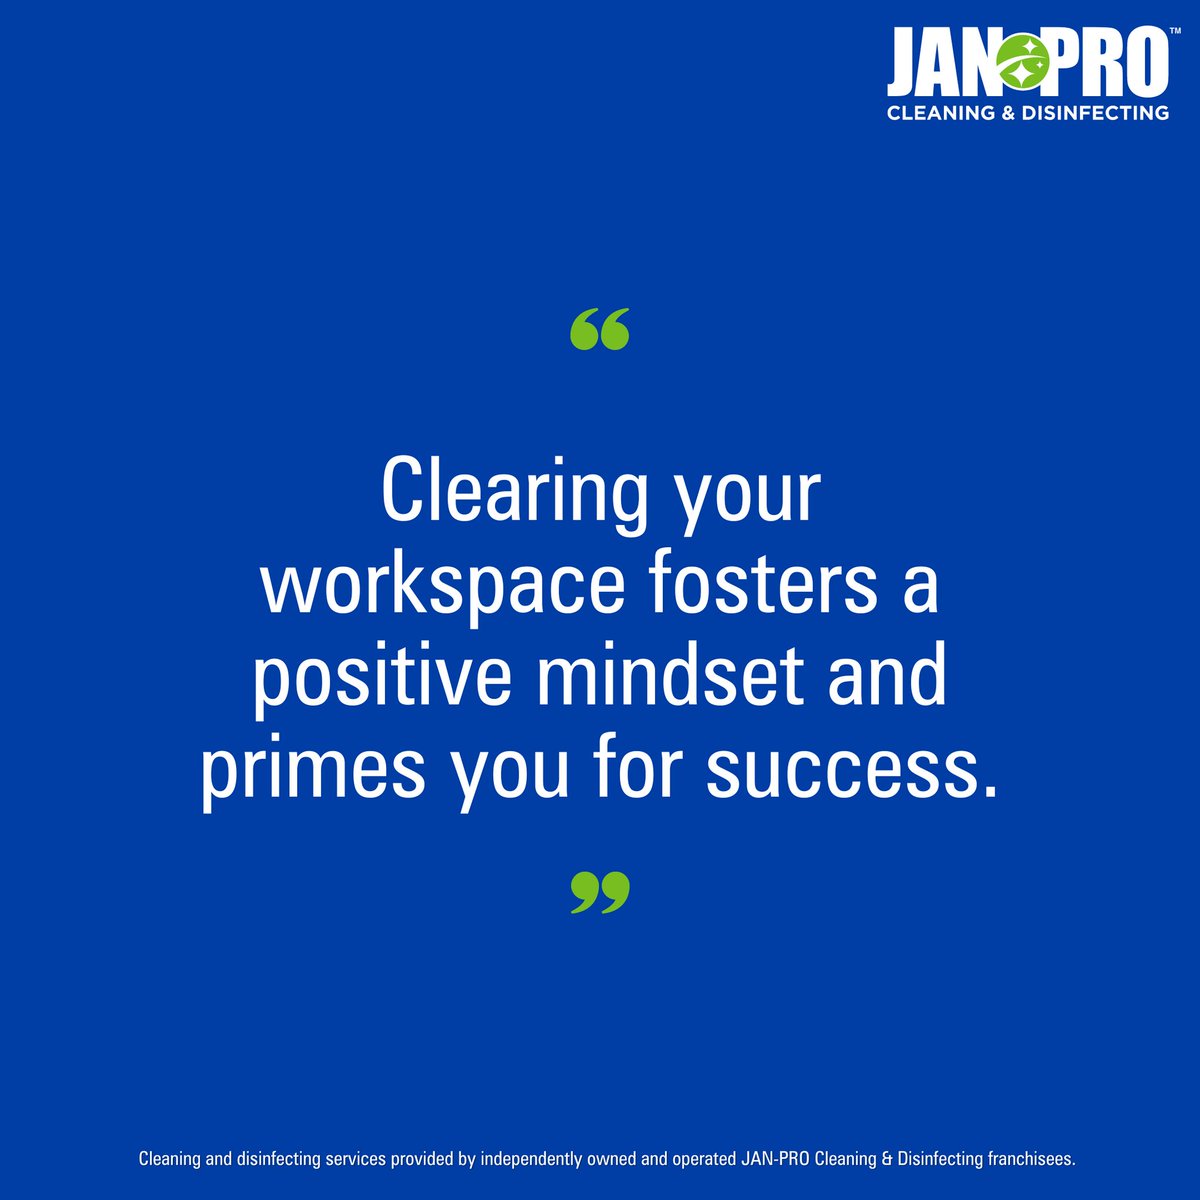 Happy Thursday!

Start your day with positive thoughts and a clean and organize space!

#commercialcleaning #janitorialservices #businesscleaning #northeastwisconsin  #janpro #janproinNortheastWisconsin #business #EnviroShield #GreenCleaning #HappyThursday